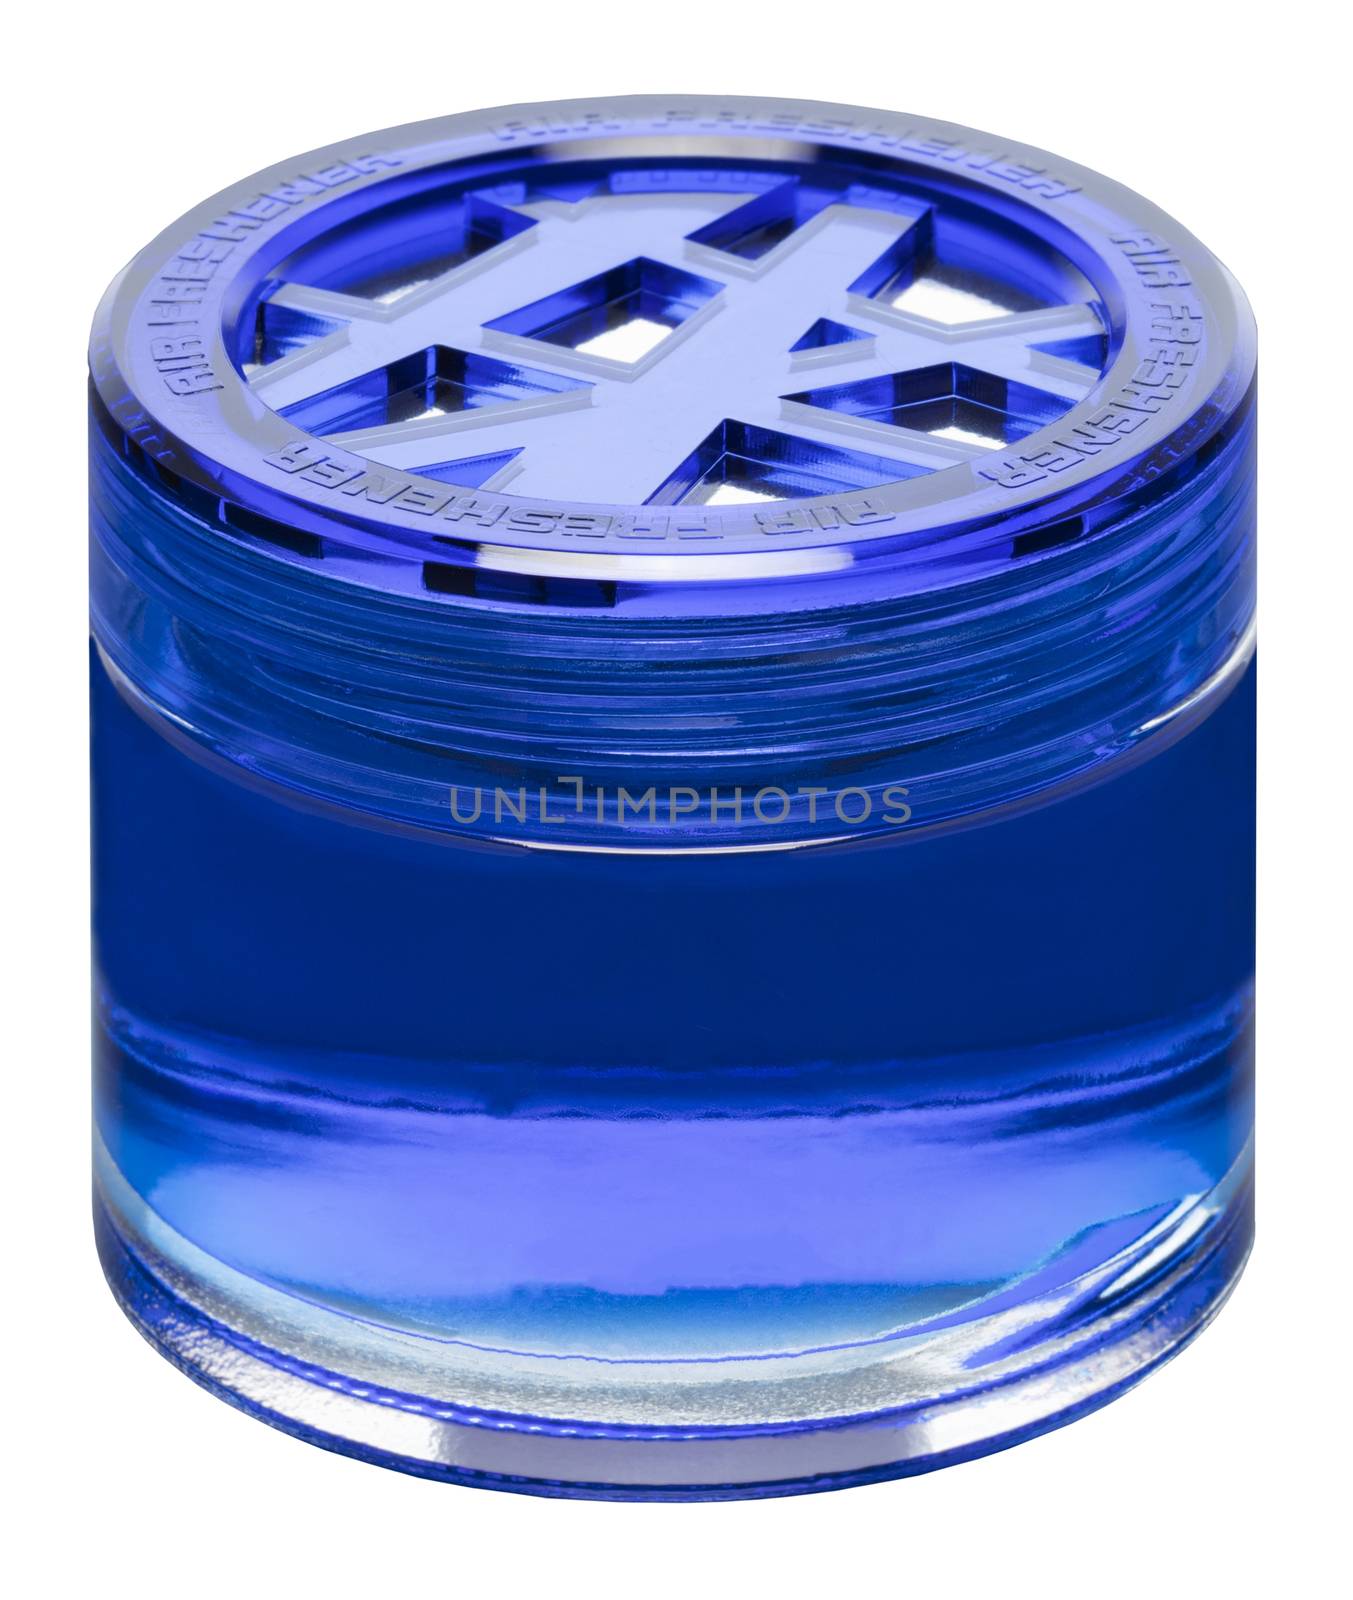 Bottle of air freshener blue in the original packaging isolated on white background, close-up.